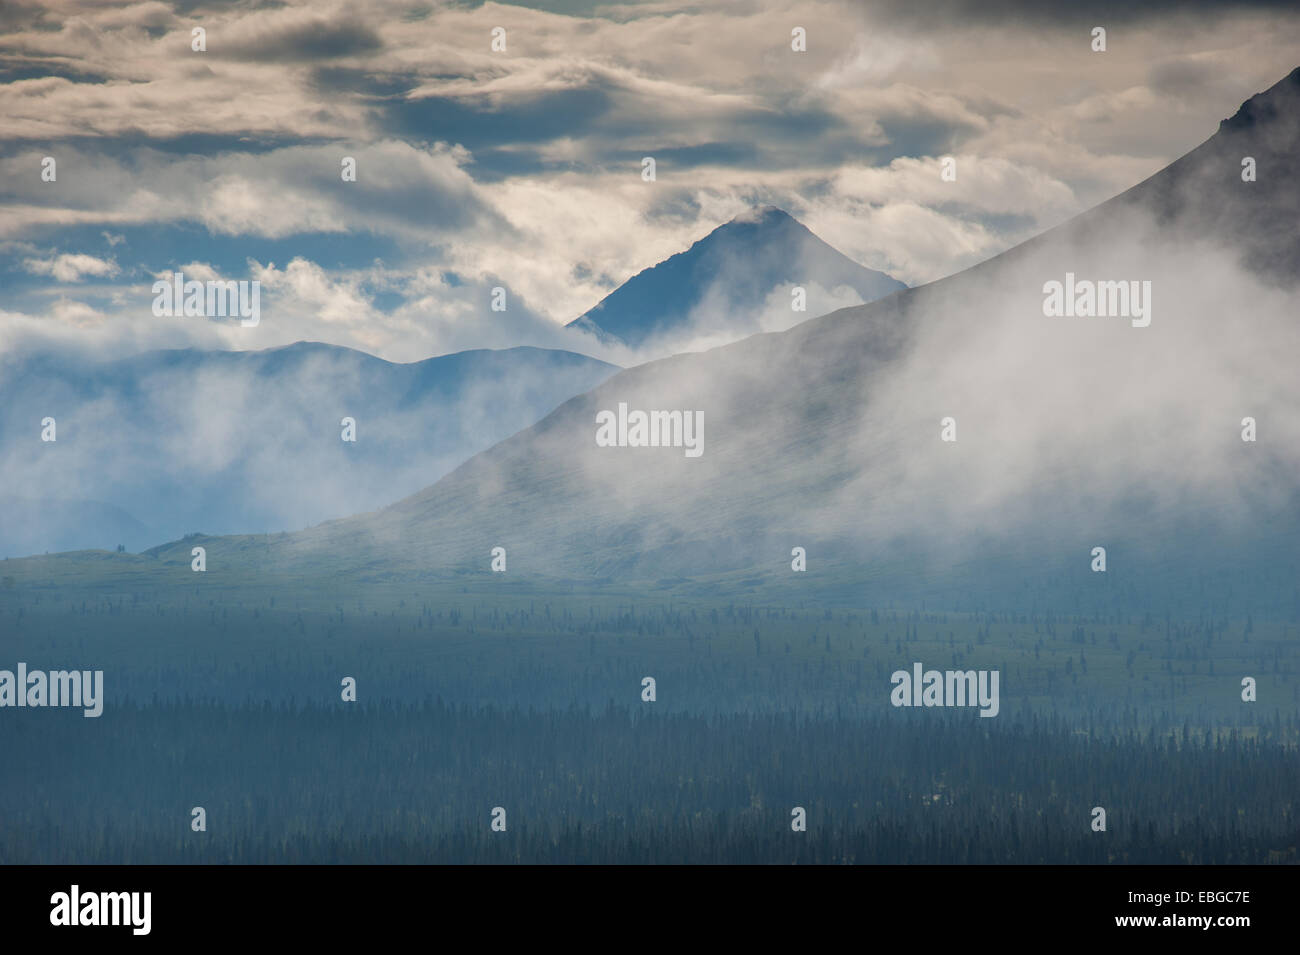 Alaskan mountain range obscured by afternoon haze Stock Photo